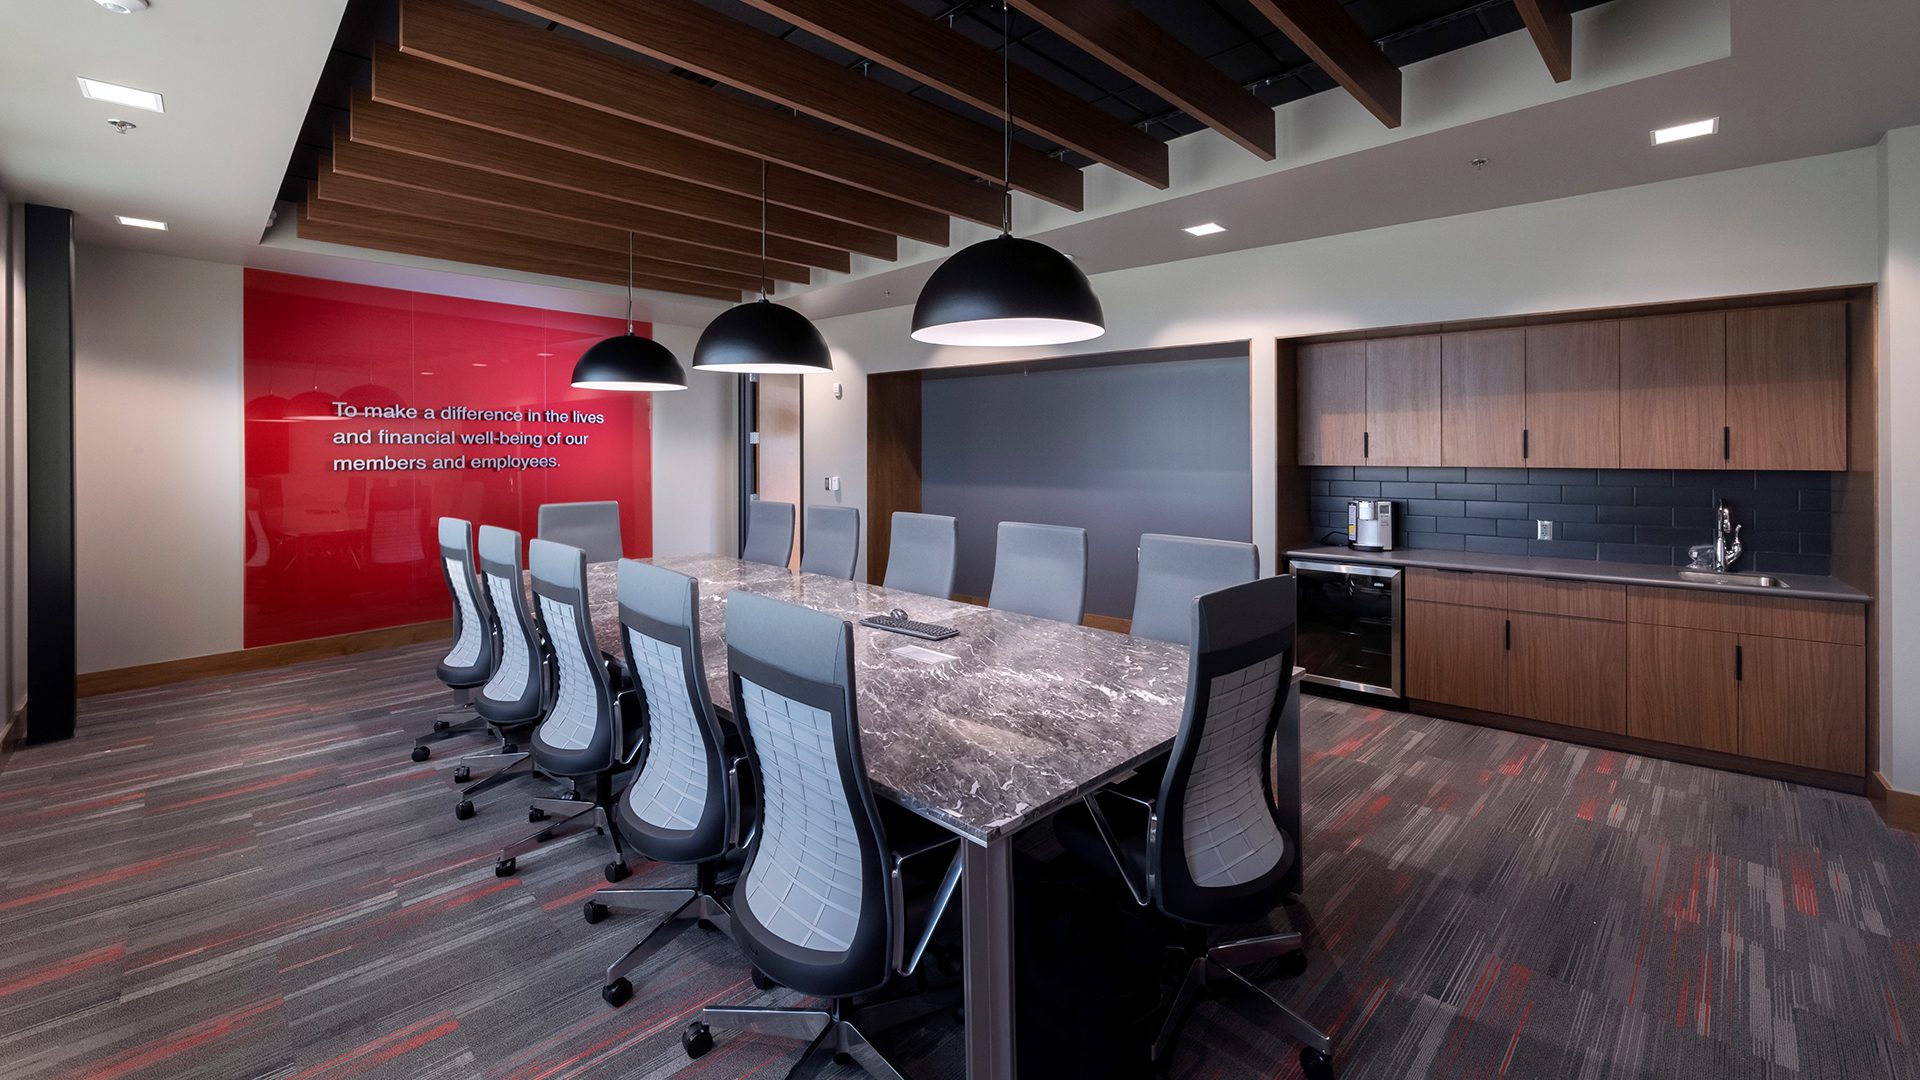 ALEC Conference room with wood ceiling and red accent wall